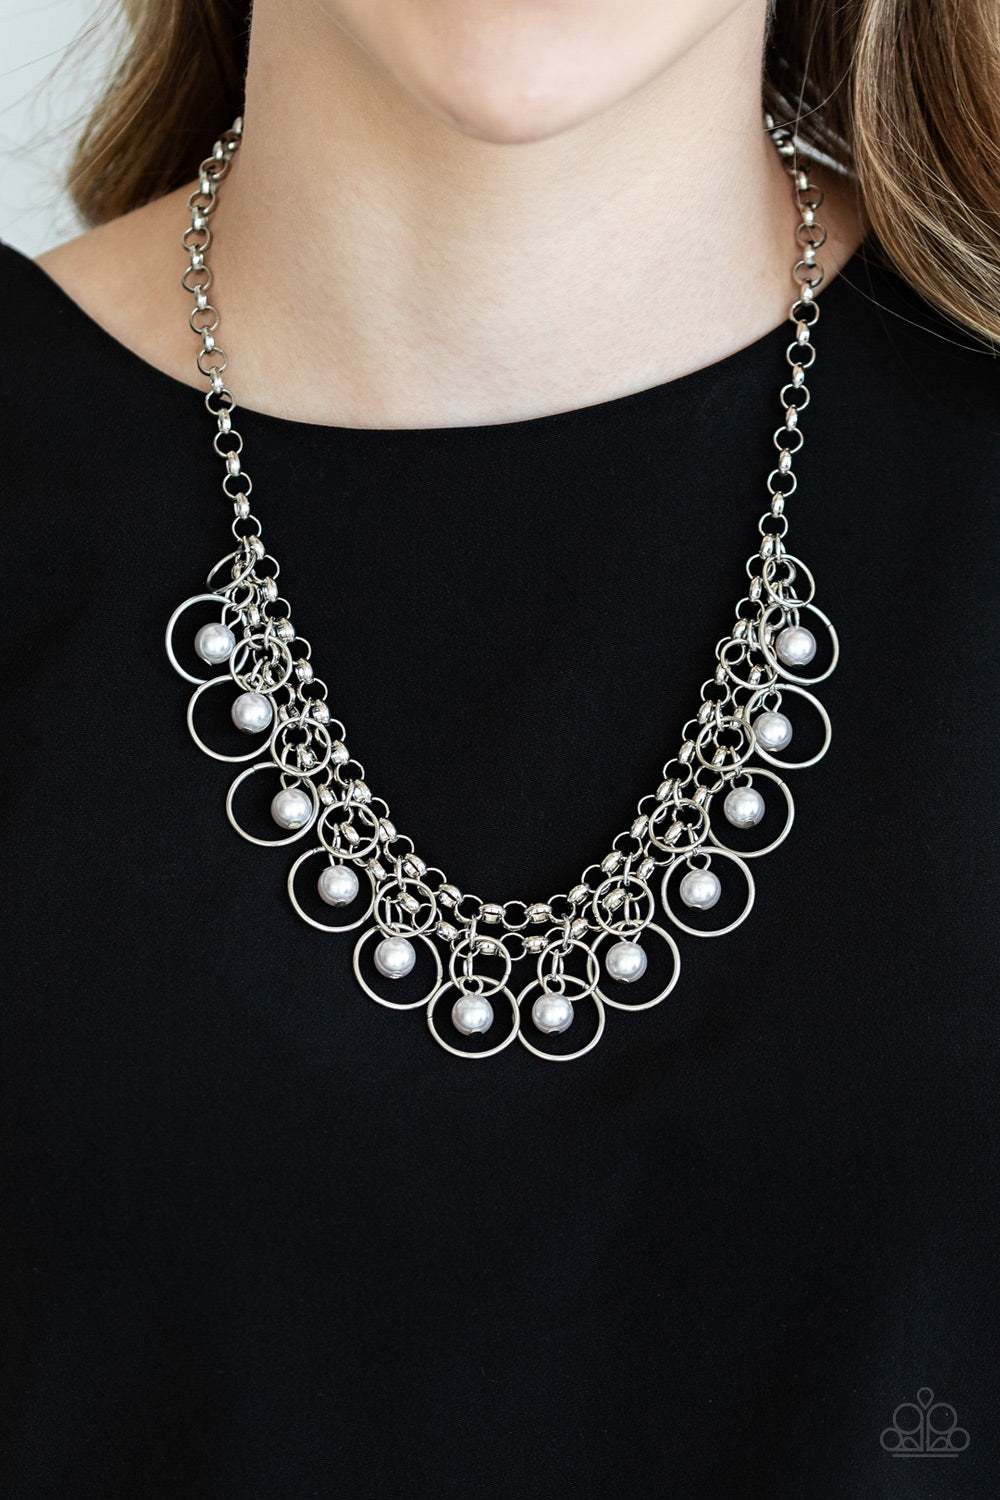 Paparazzi necklace - Party Time - Silver